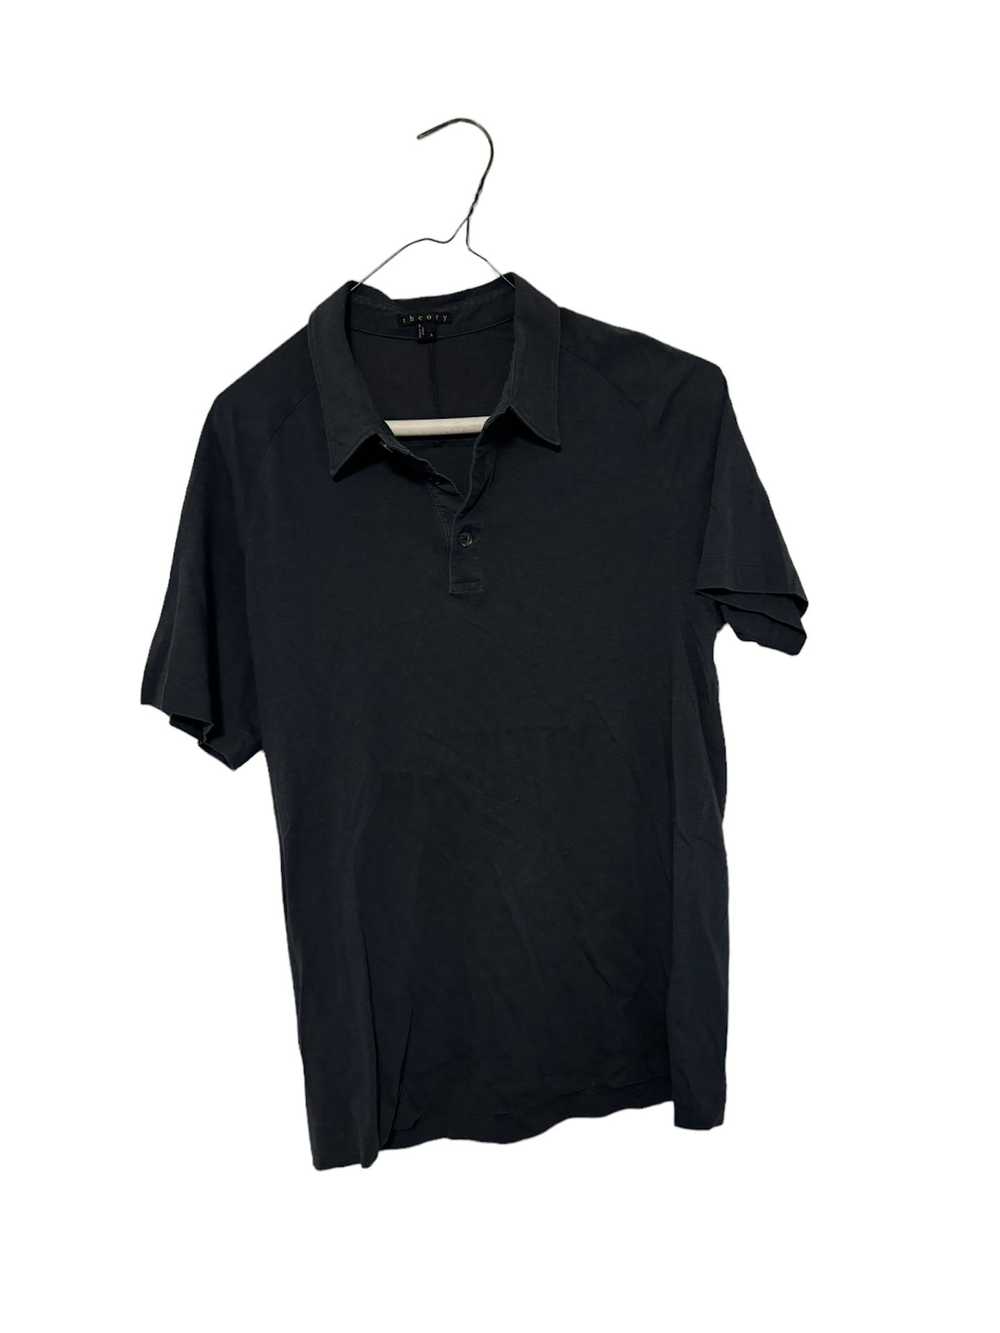 Theory × Vintage Vintage Theory polo size S - image 1